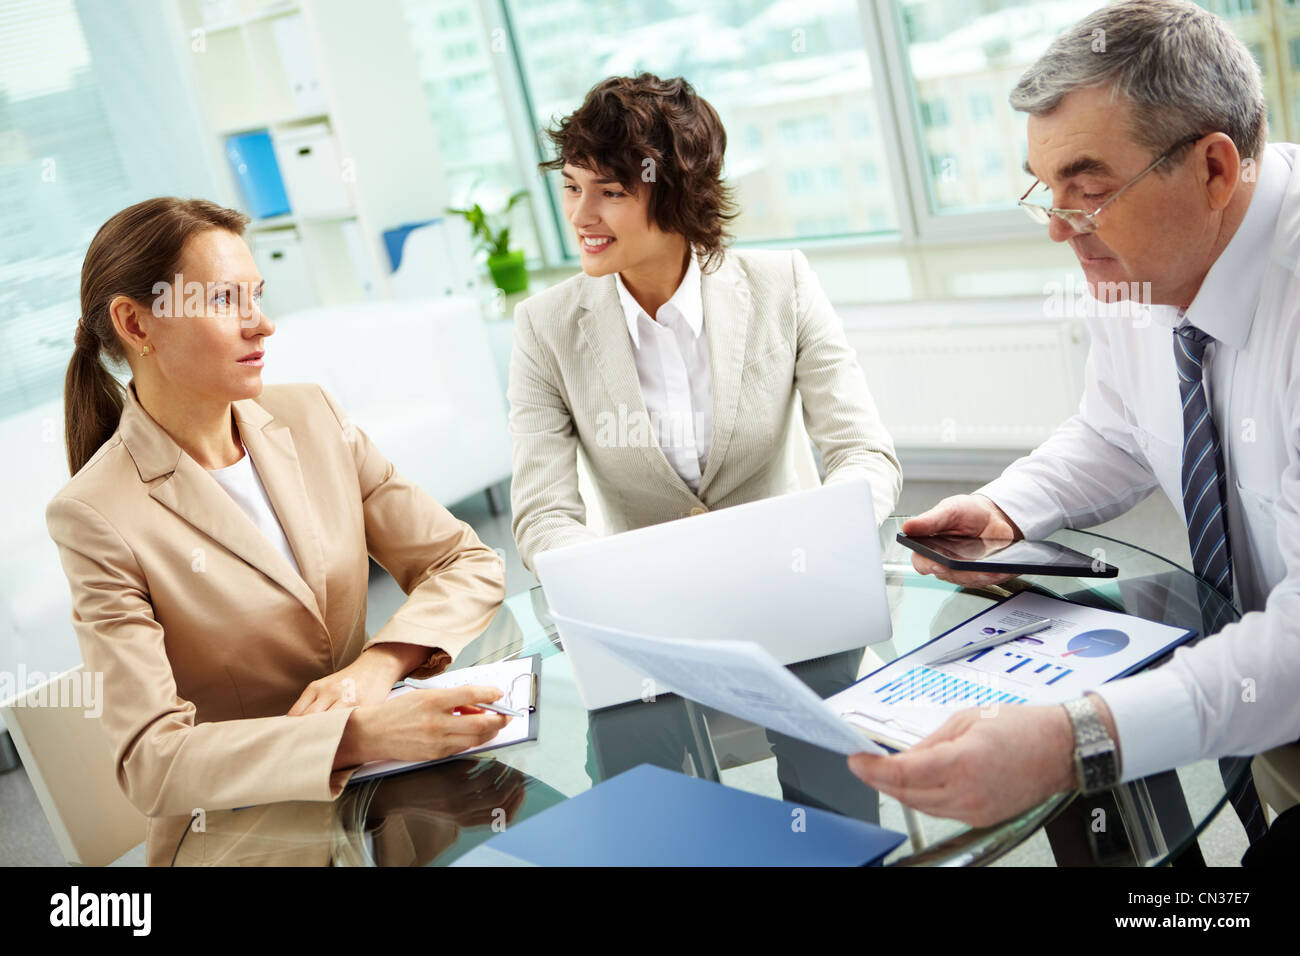 Business group of diverse age discussing some matters, tilt up Stock Photo